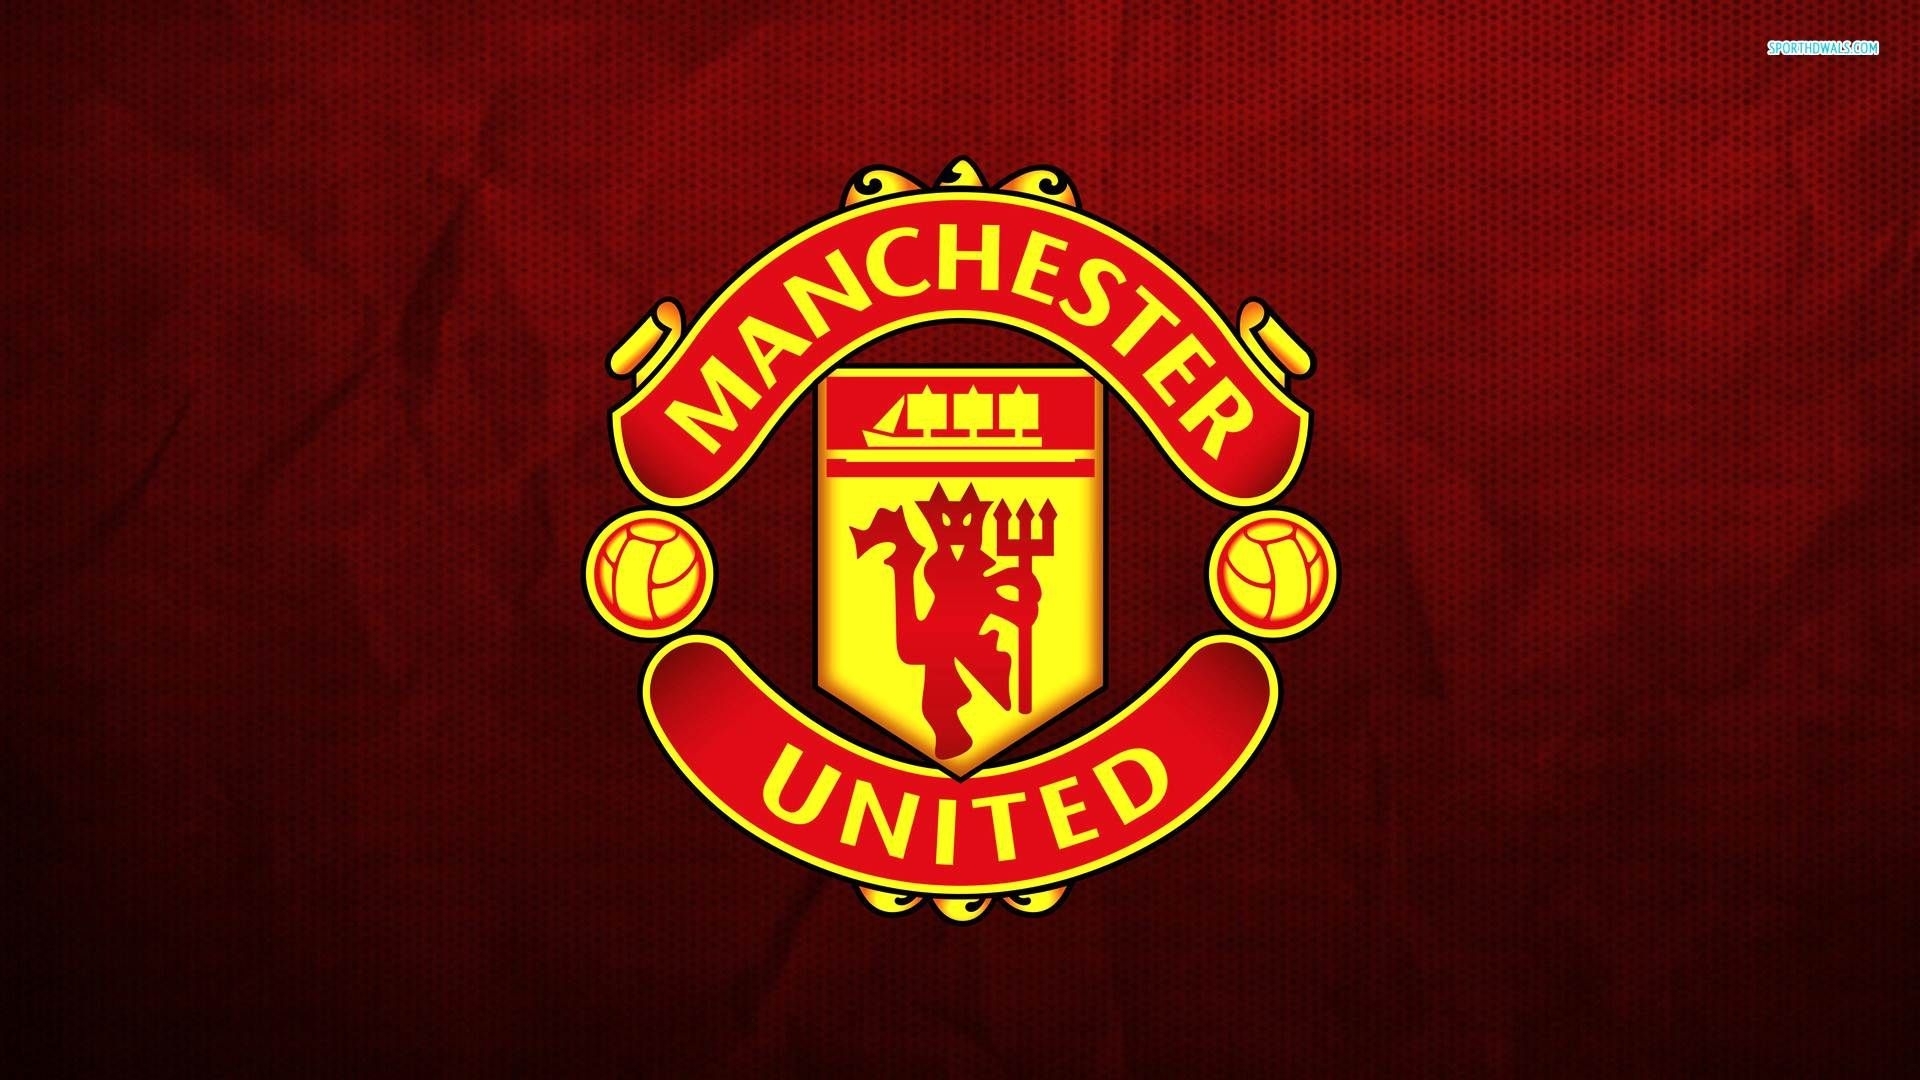 10 New Man United Wallpapers Hd FULL HD 1080p For PC Background